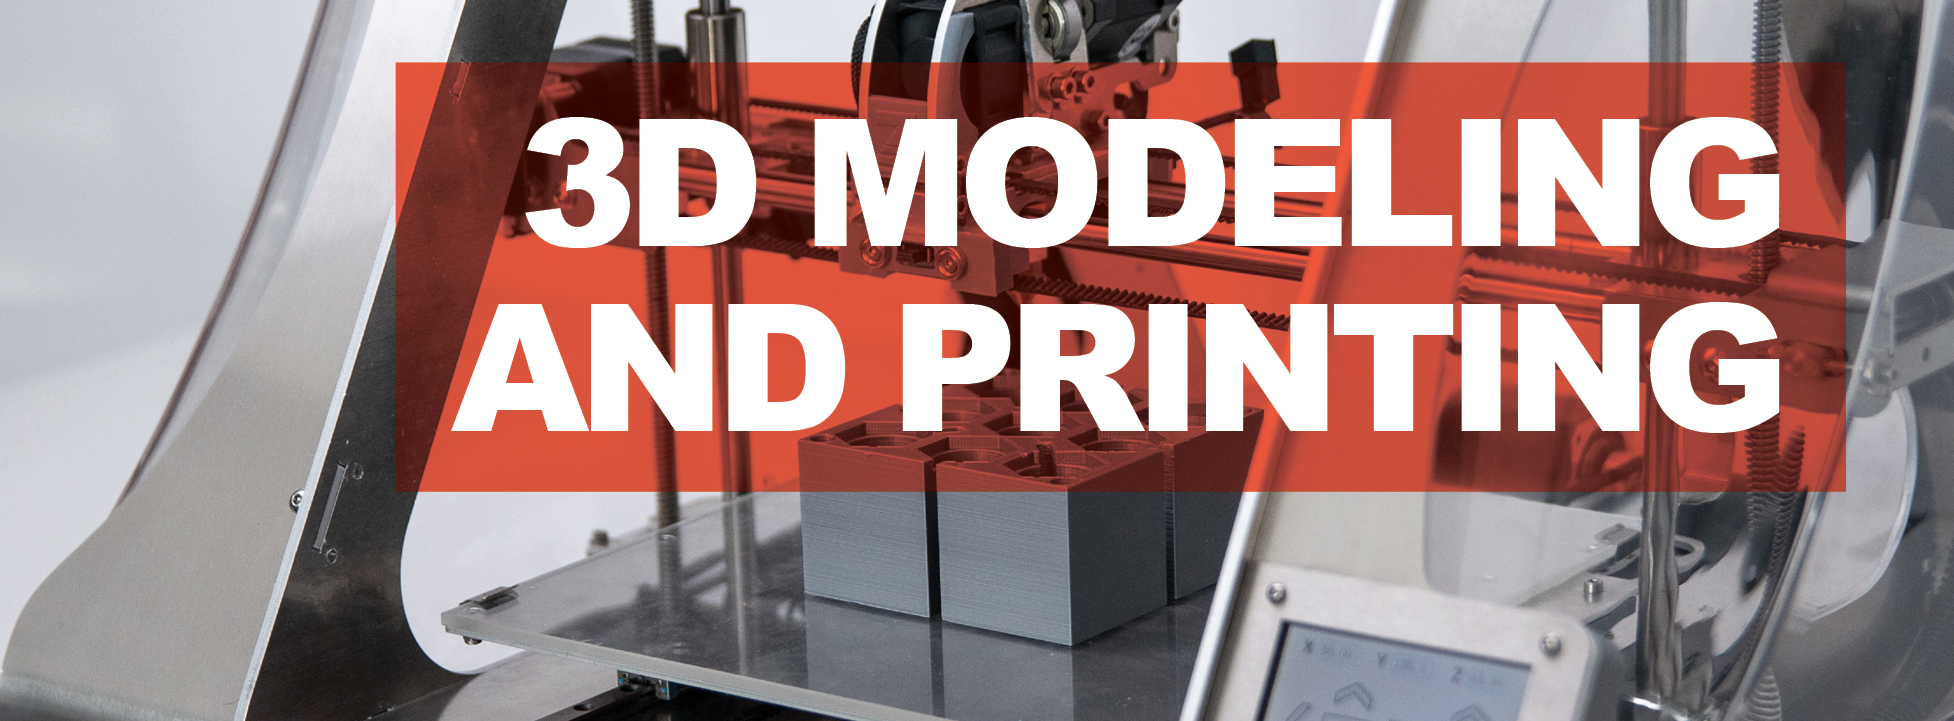 3D Modeling and Printing